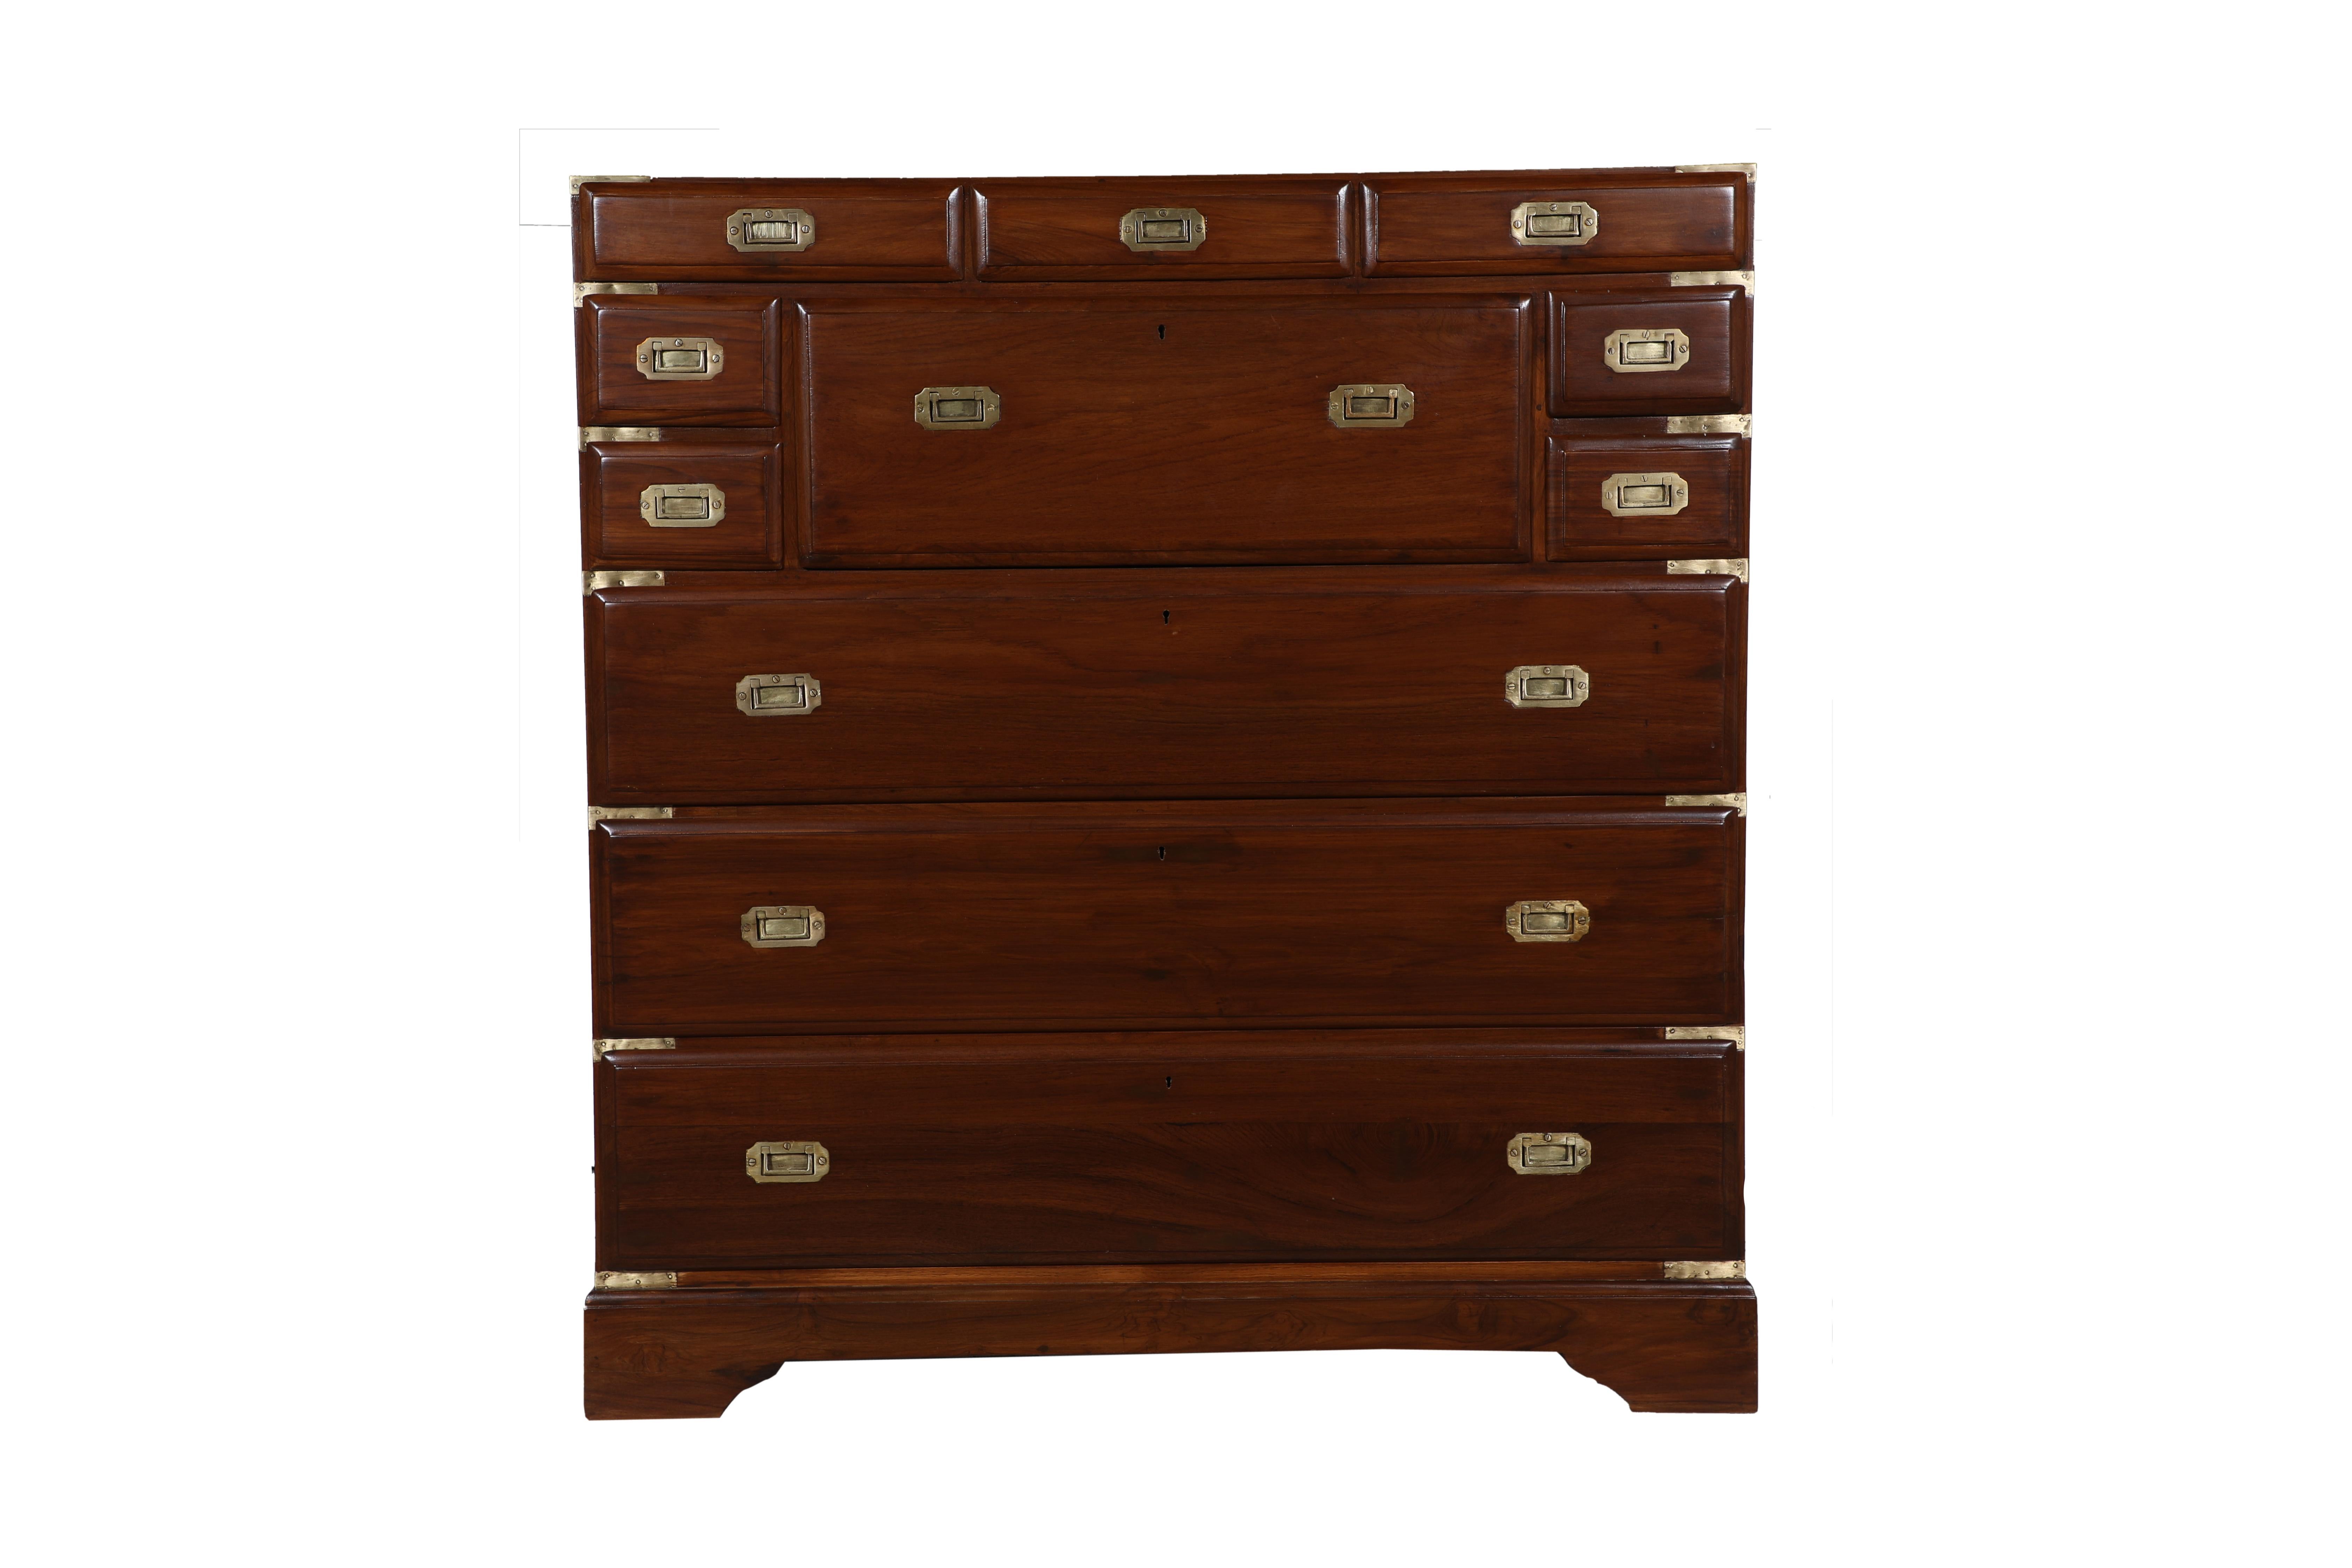 A handsome British Campaign secretary and chest of drawers in teak with brass strap corners and brass flush drawer pulls. It features a center drop down writing desk with a fitted interior. The desk portion pulls forward and sits 14